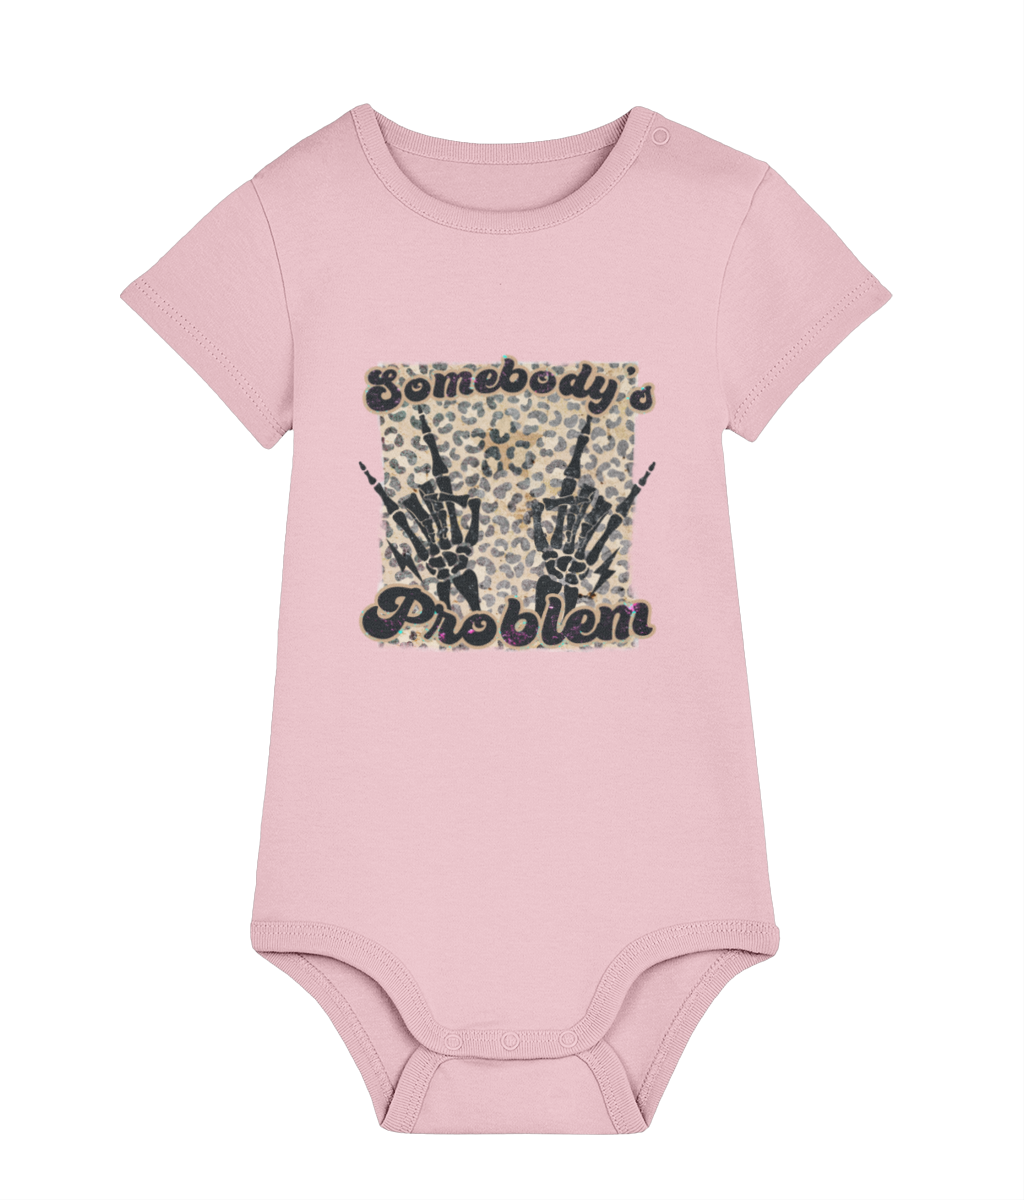 Somebody's Problem Baby Bodysuit - Super Soft Organic Cotton, Perfect Gift for new borns or 1st Birthdays...